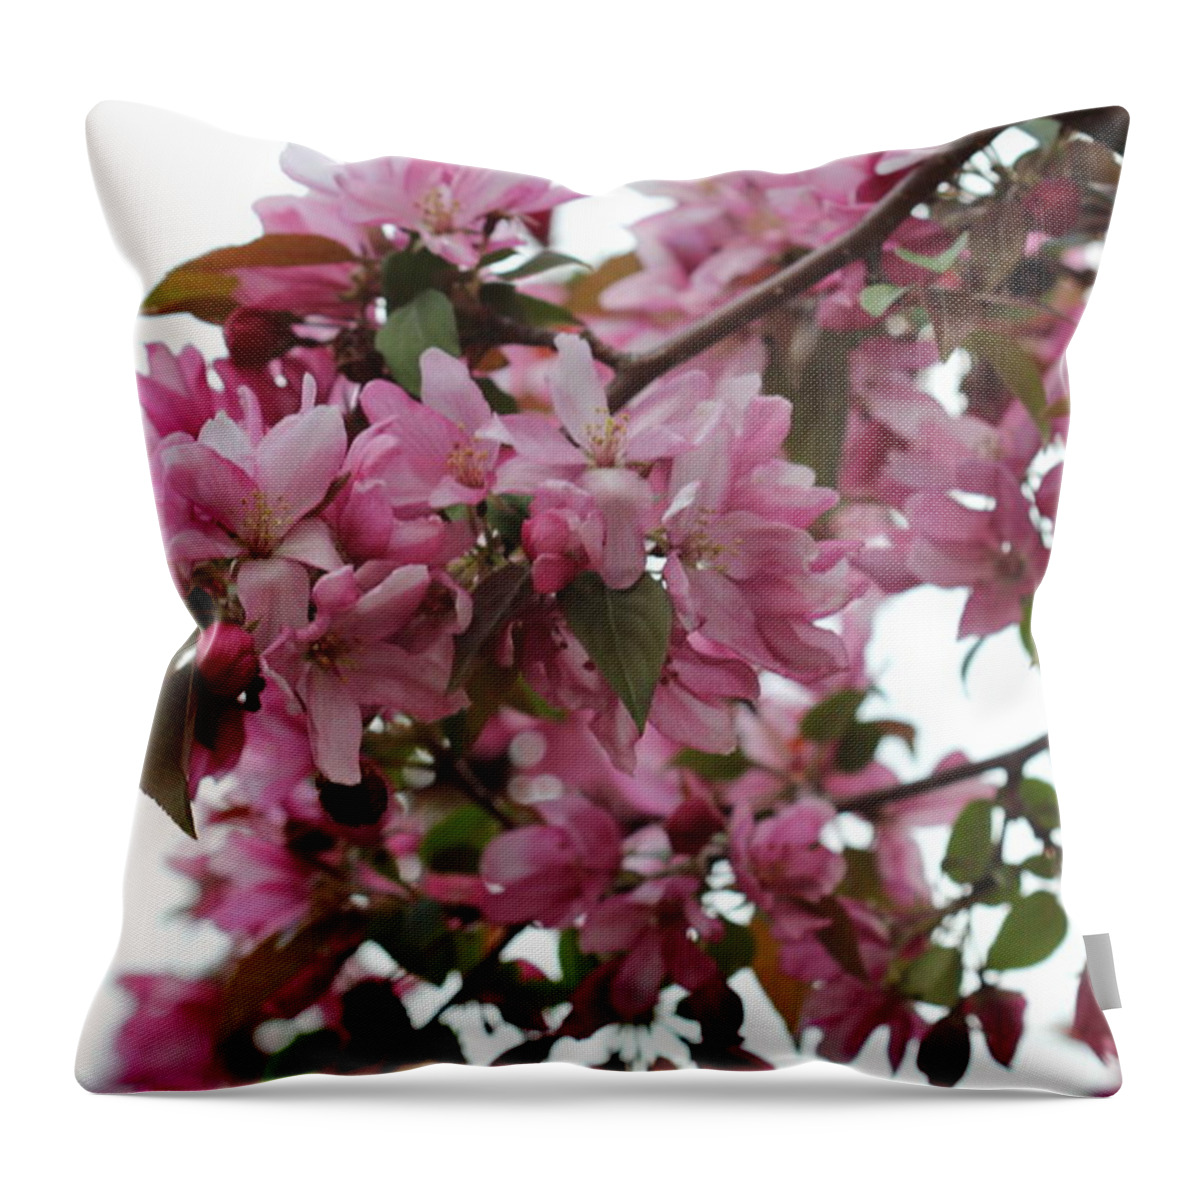 Landscape Throw Pillow featuring the photograph Crabapple Blossoms #3 by Donna L Munro